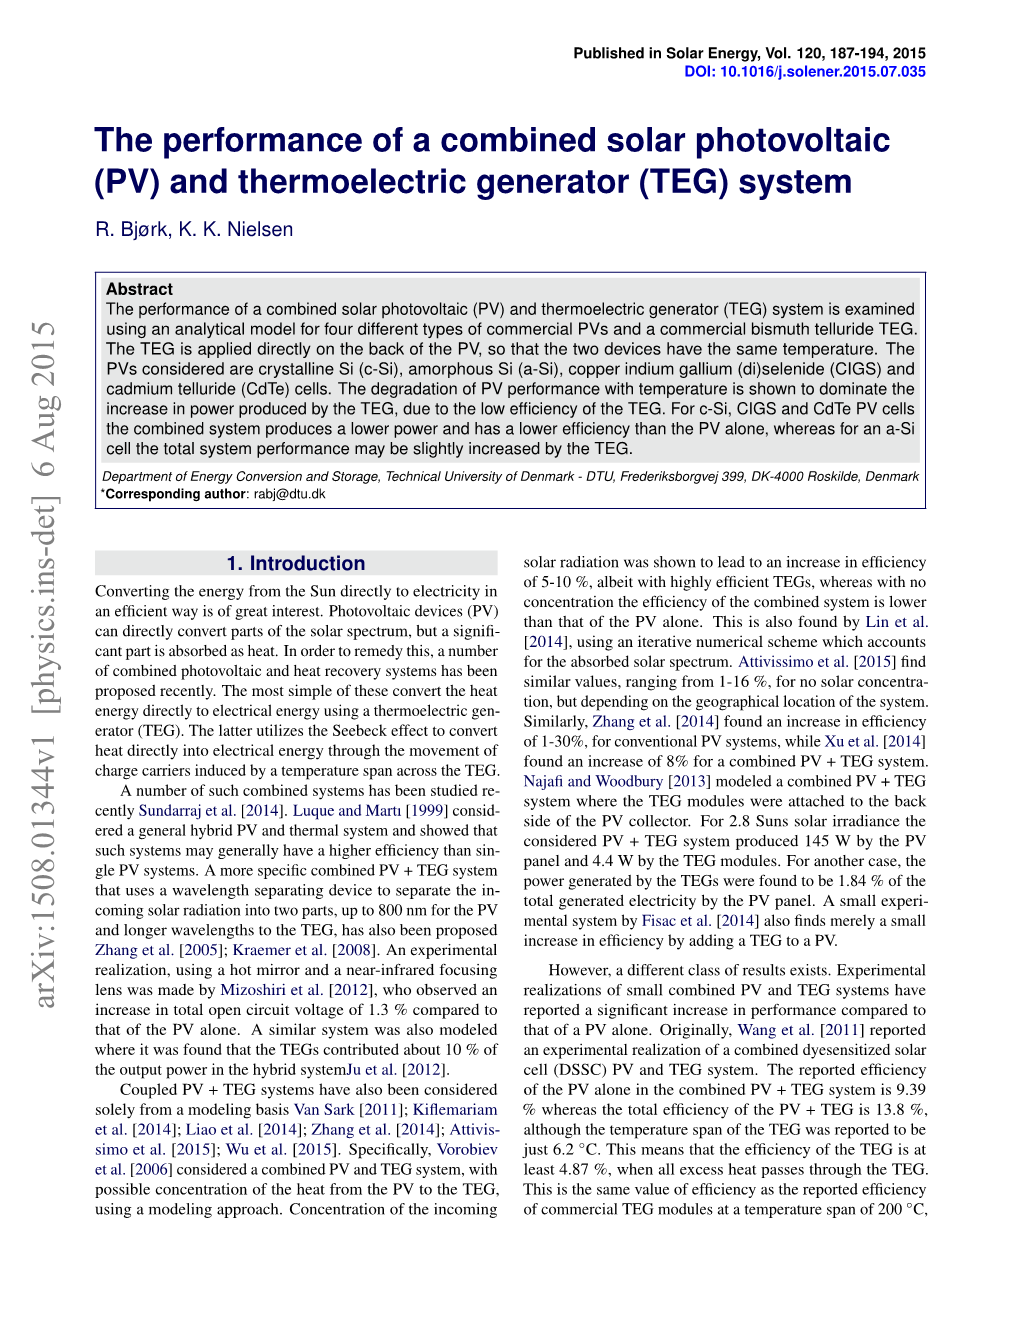 (PV) and Thermoelectric Generator (TEG) System